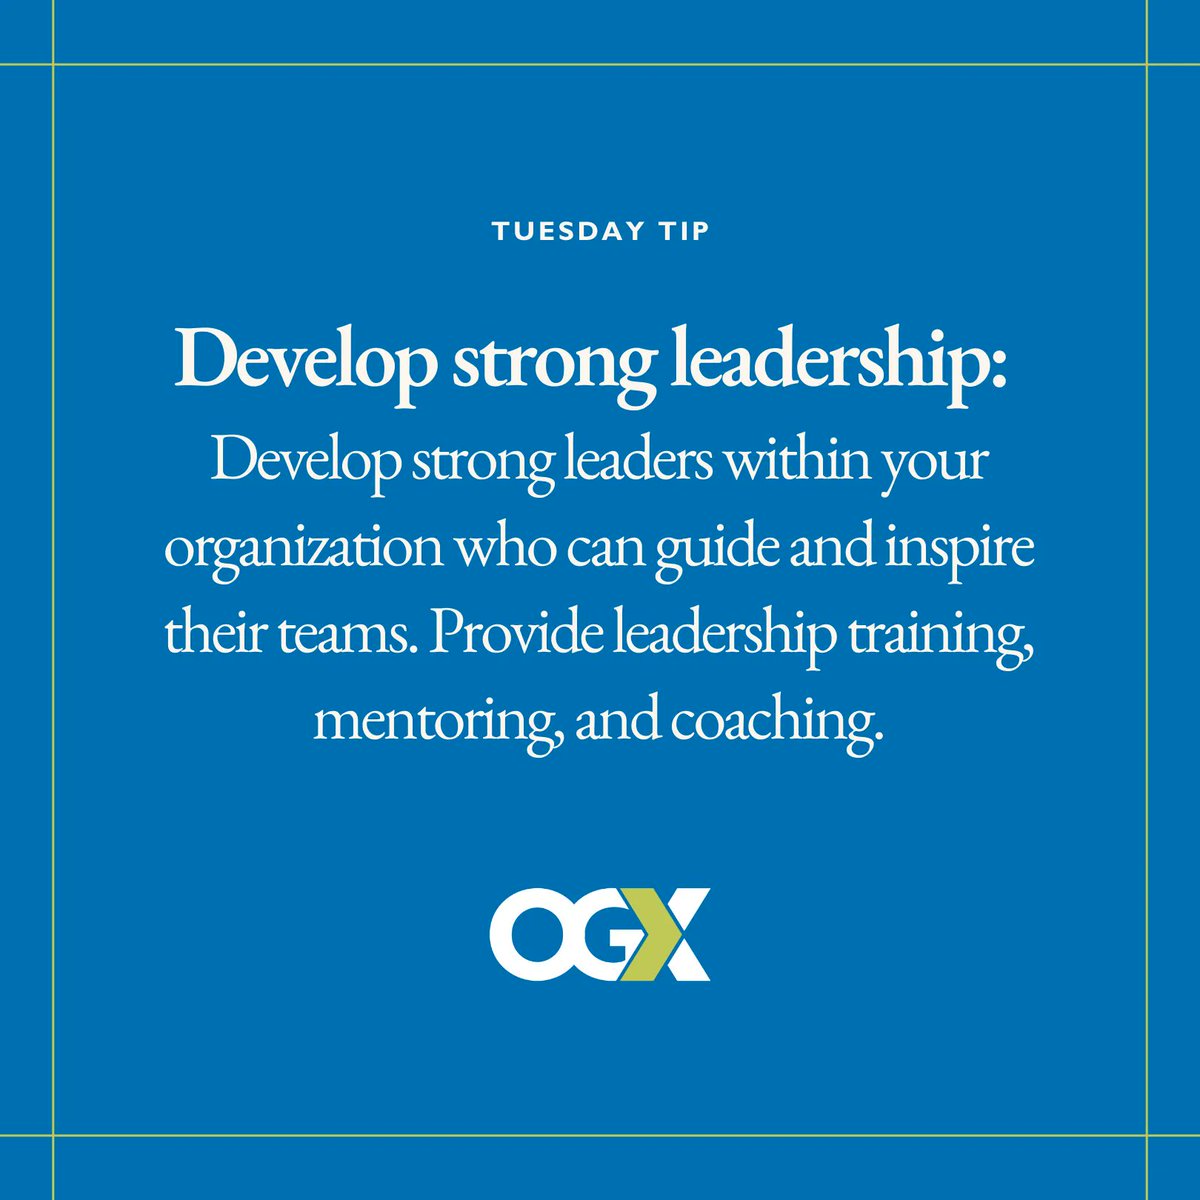 Today's #TuesdayTip is: Develop strong leadership! Develop strong leaders within your organization who can guide and inspire their teams. Provide leadership training, mentoring, and coaching.